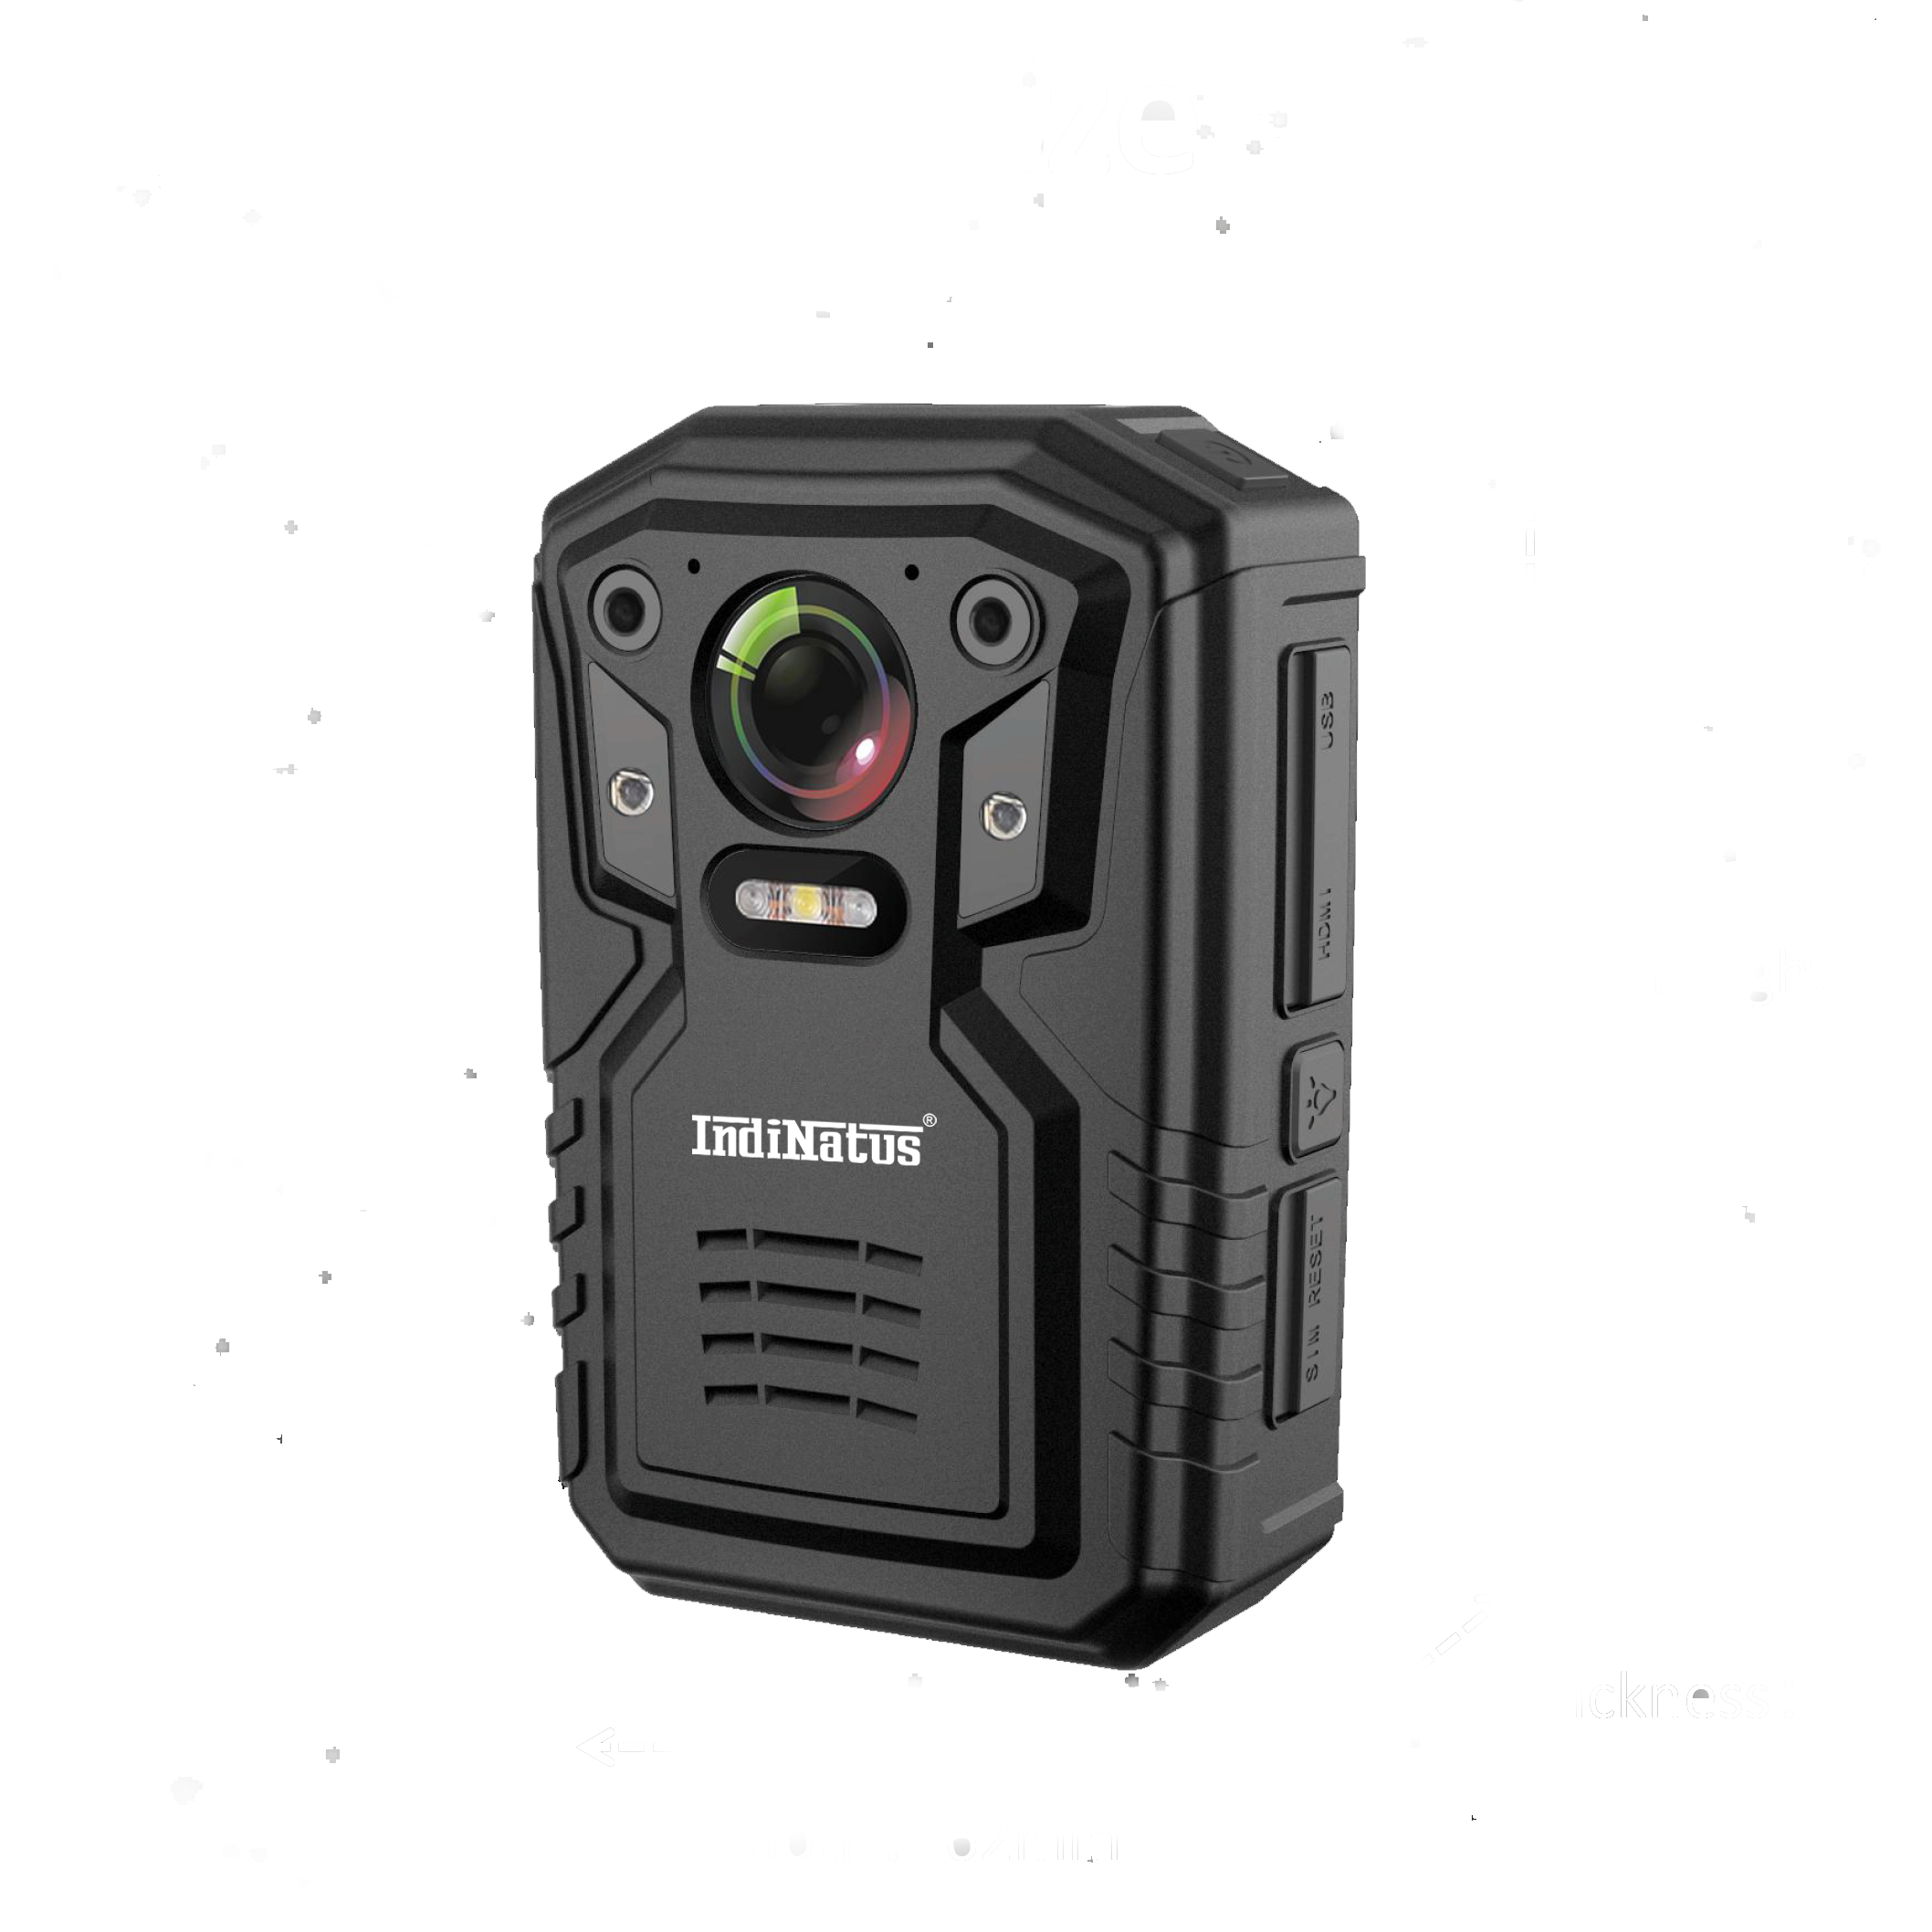  2MP 4G BodyWorn Camera , IN-BW216-4G,  IndiNatus® India Private Limited - India Ka Apna Brand, Indian CCTV  Brand,  Make In India CCTV camera, Make in india cctv camera brand available on gem portal, IP Network Camera, Indian brand CCTV Camera, Best OEM Of CCTV in India      